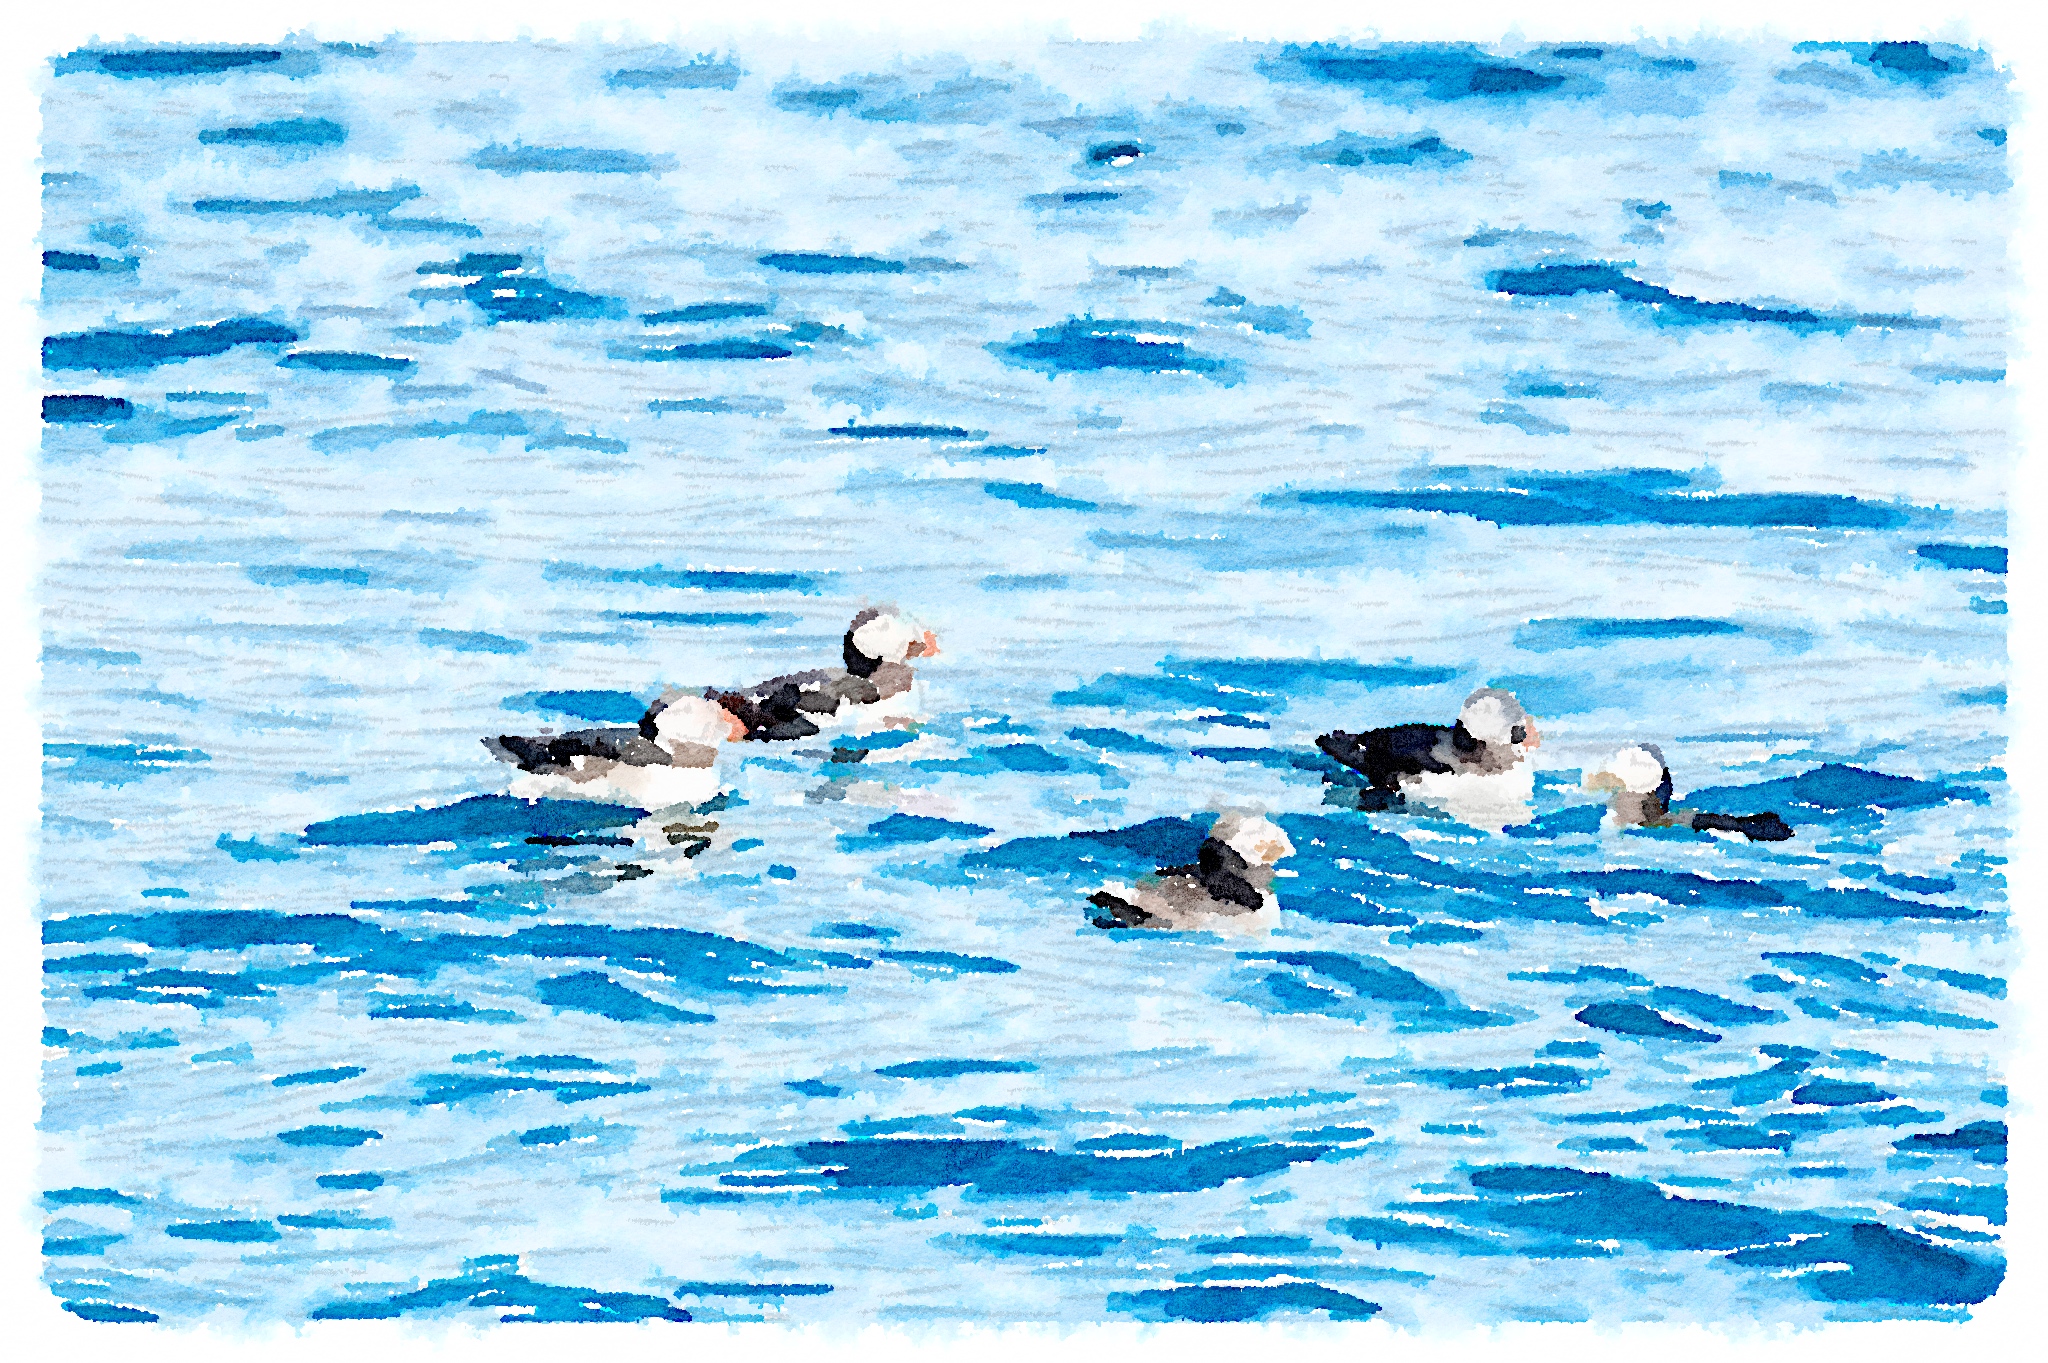 Puffins on the water